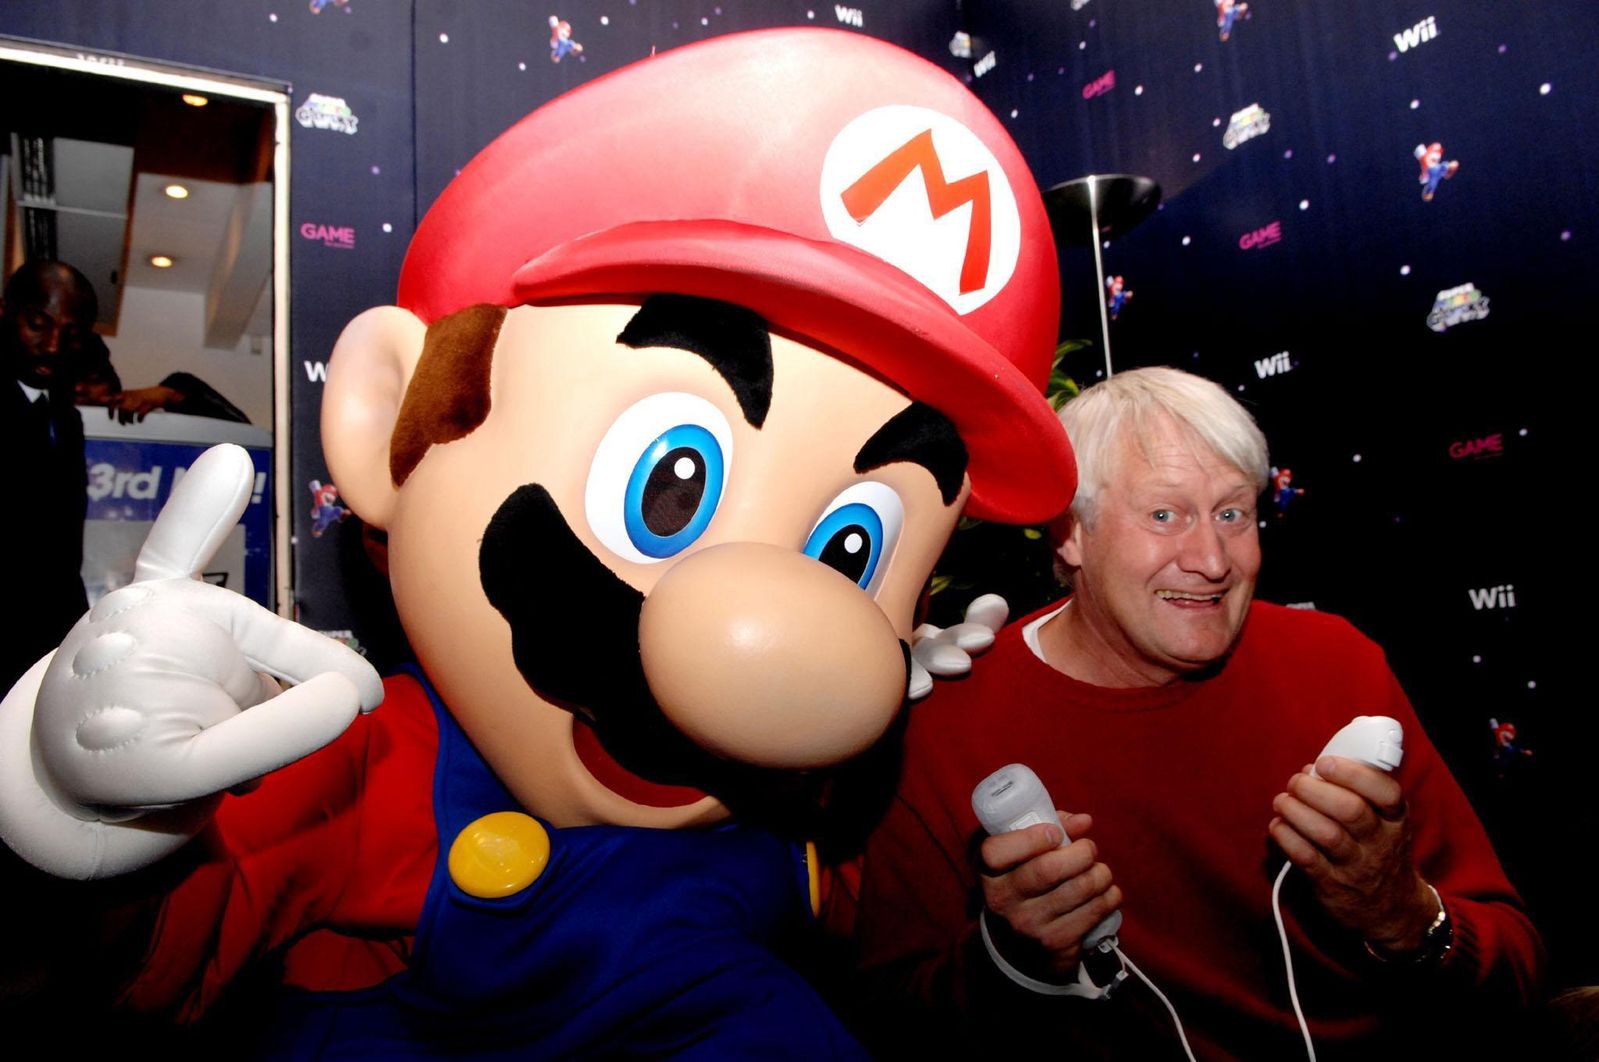 The Man Behind Nintendo’s Mario Is Retiring After Nearly Three Decades #Mario